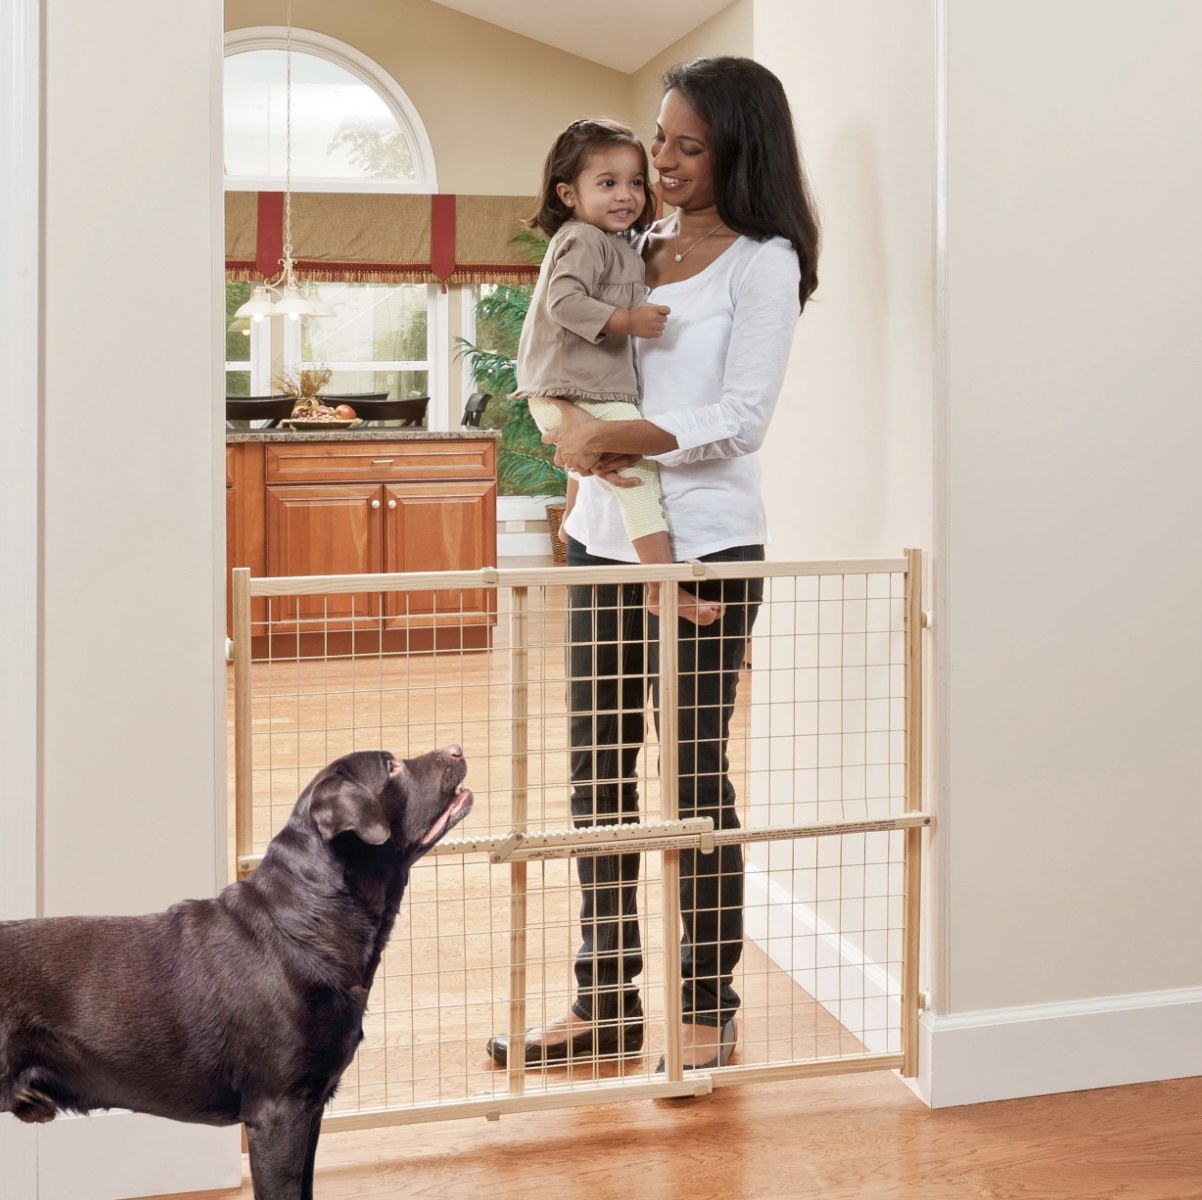 A woman holding a toddler with a brown dog waiting on the other side of a wooden gate